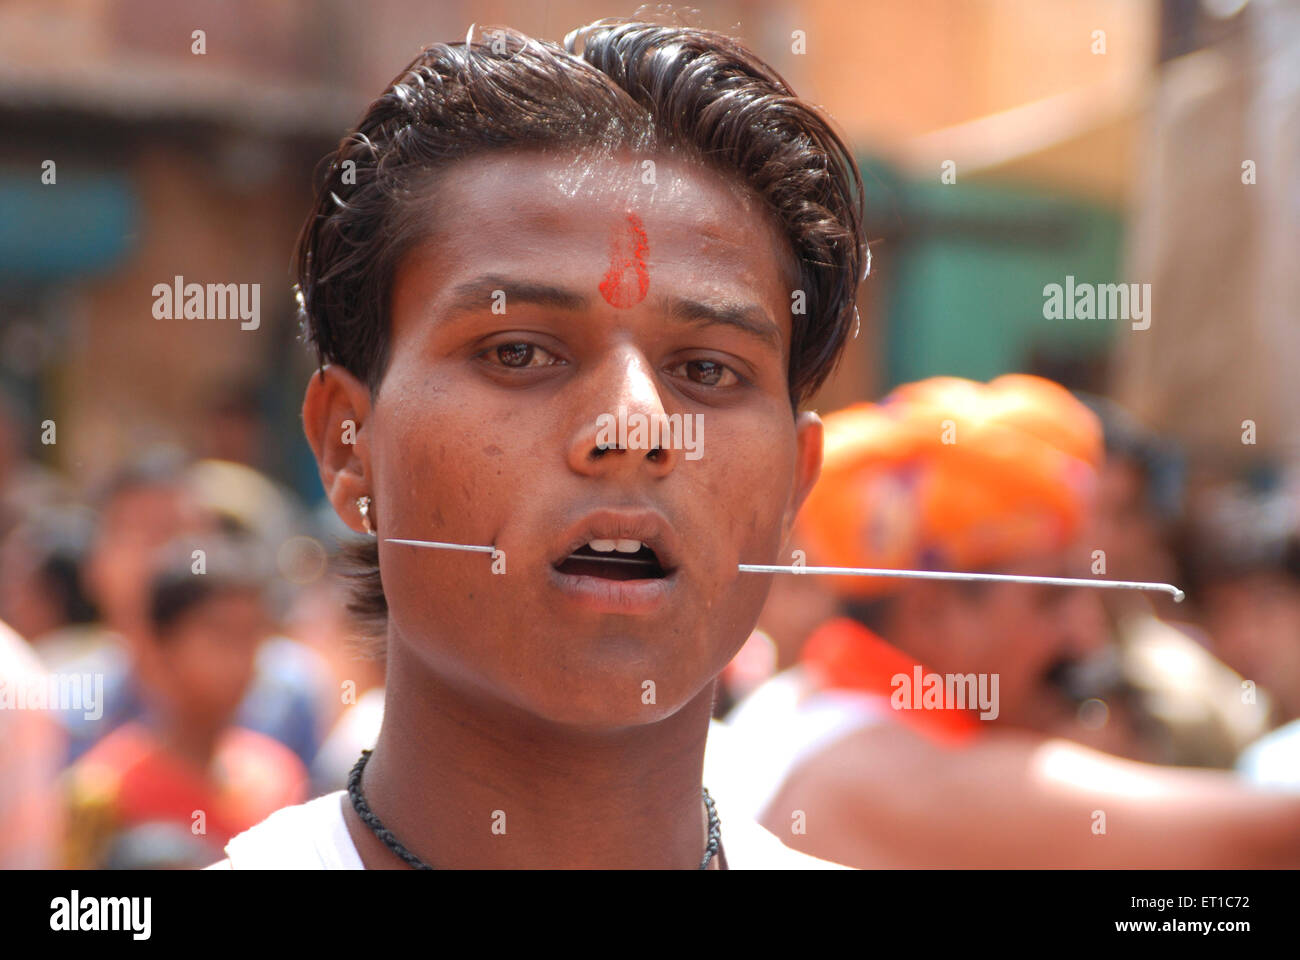 Iron rod inserted in cheeks of boy in Ramnavmi procession ; Jodhpur ; Rajasthan ; India NO MR Stock Photo